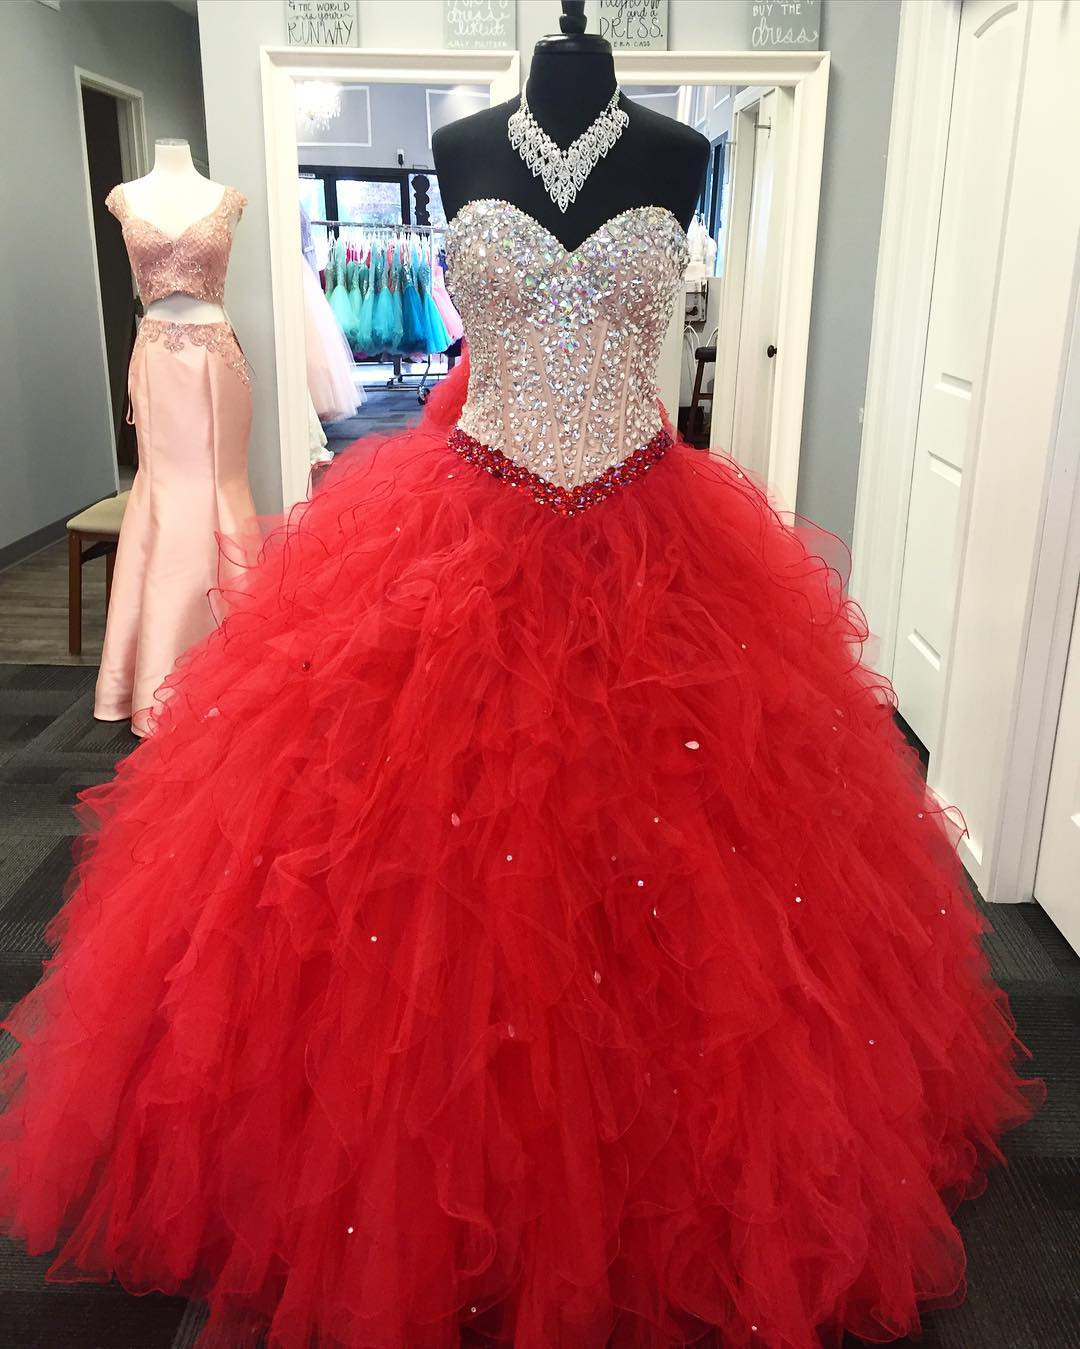 Princess Prom Ball Gown, Red Quinceanera Dresses, Sweet 16, Rhinestones Prom Dress, Sweet 18 Dresses, Sparkly Prom Dress, Tiered Prom Dress, 2023